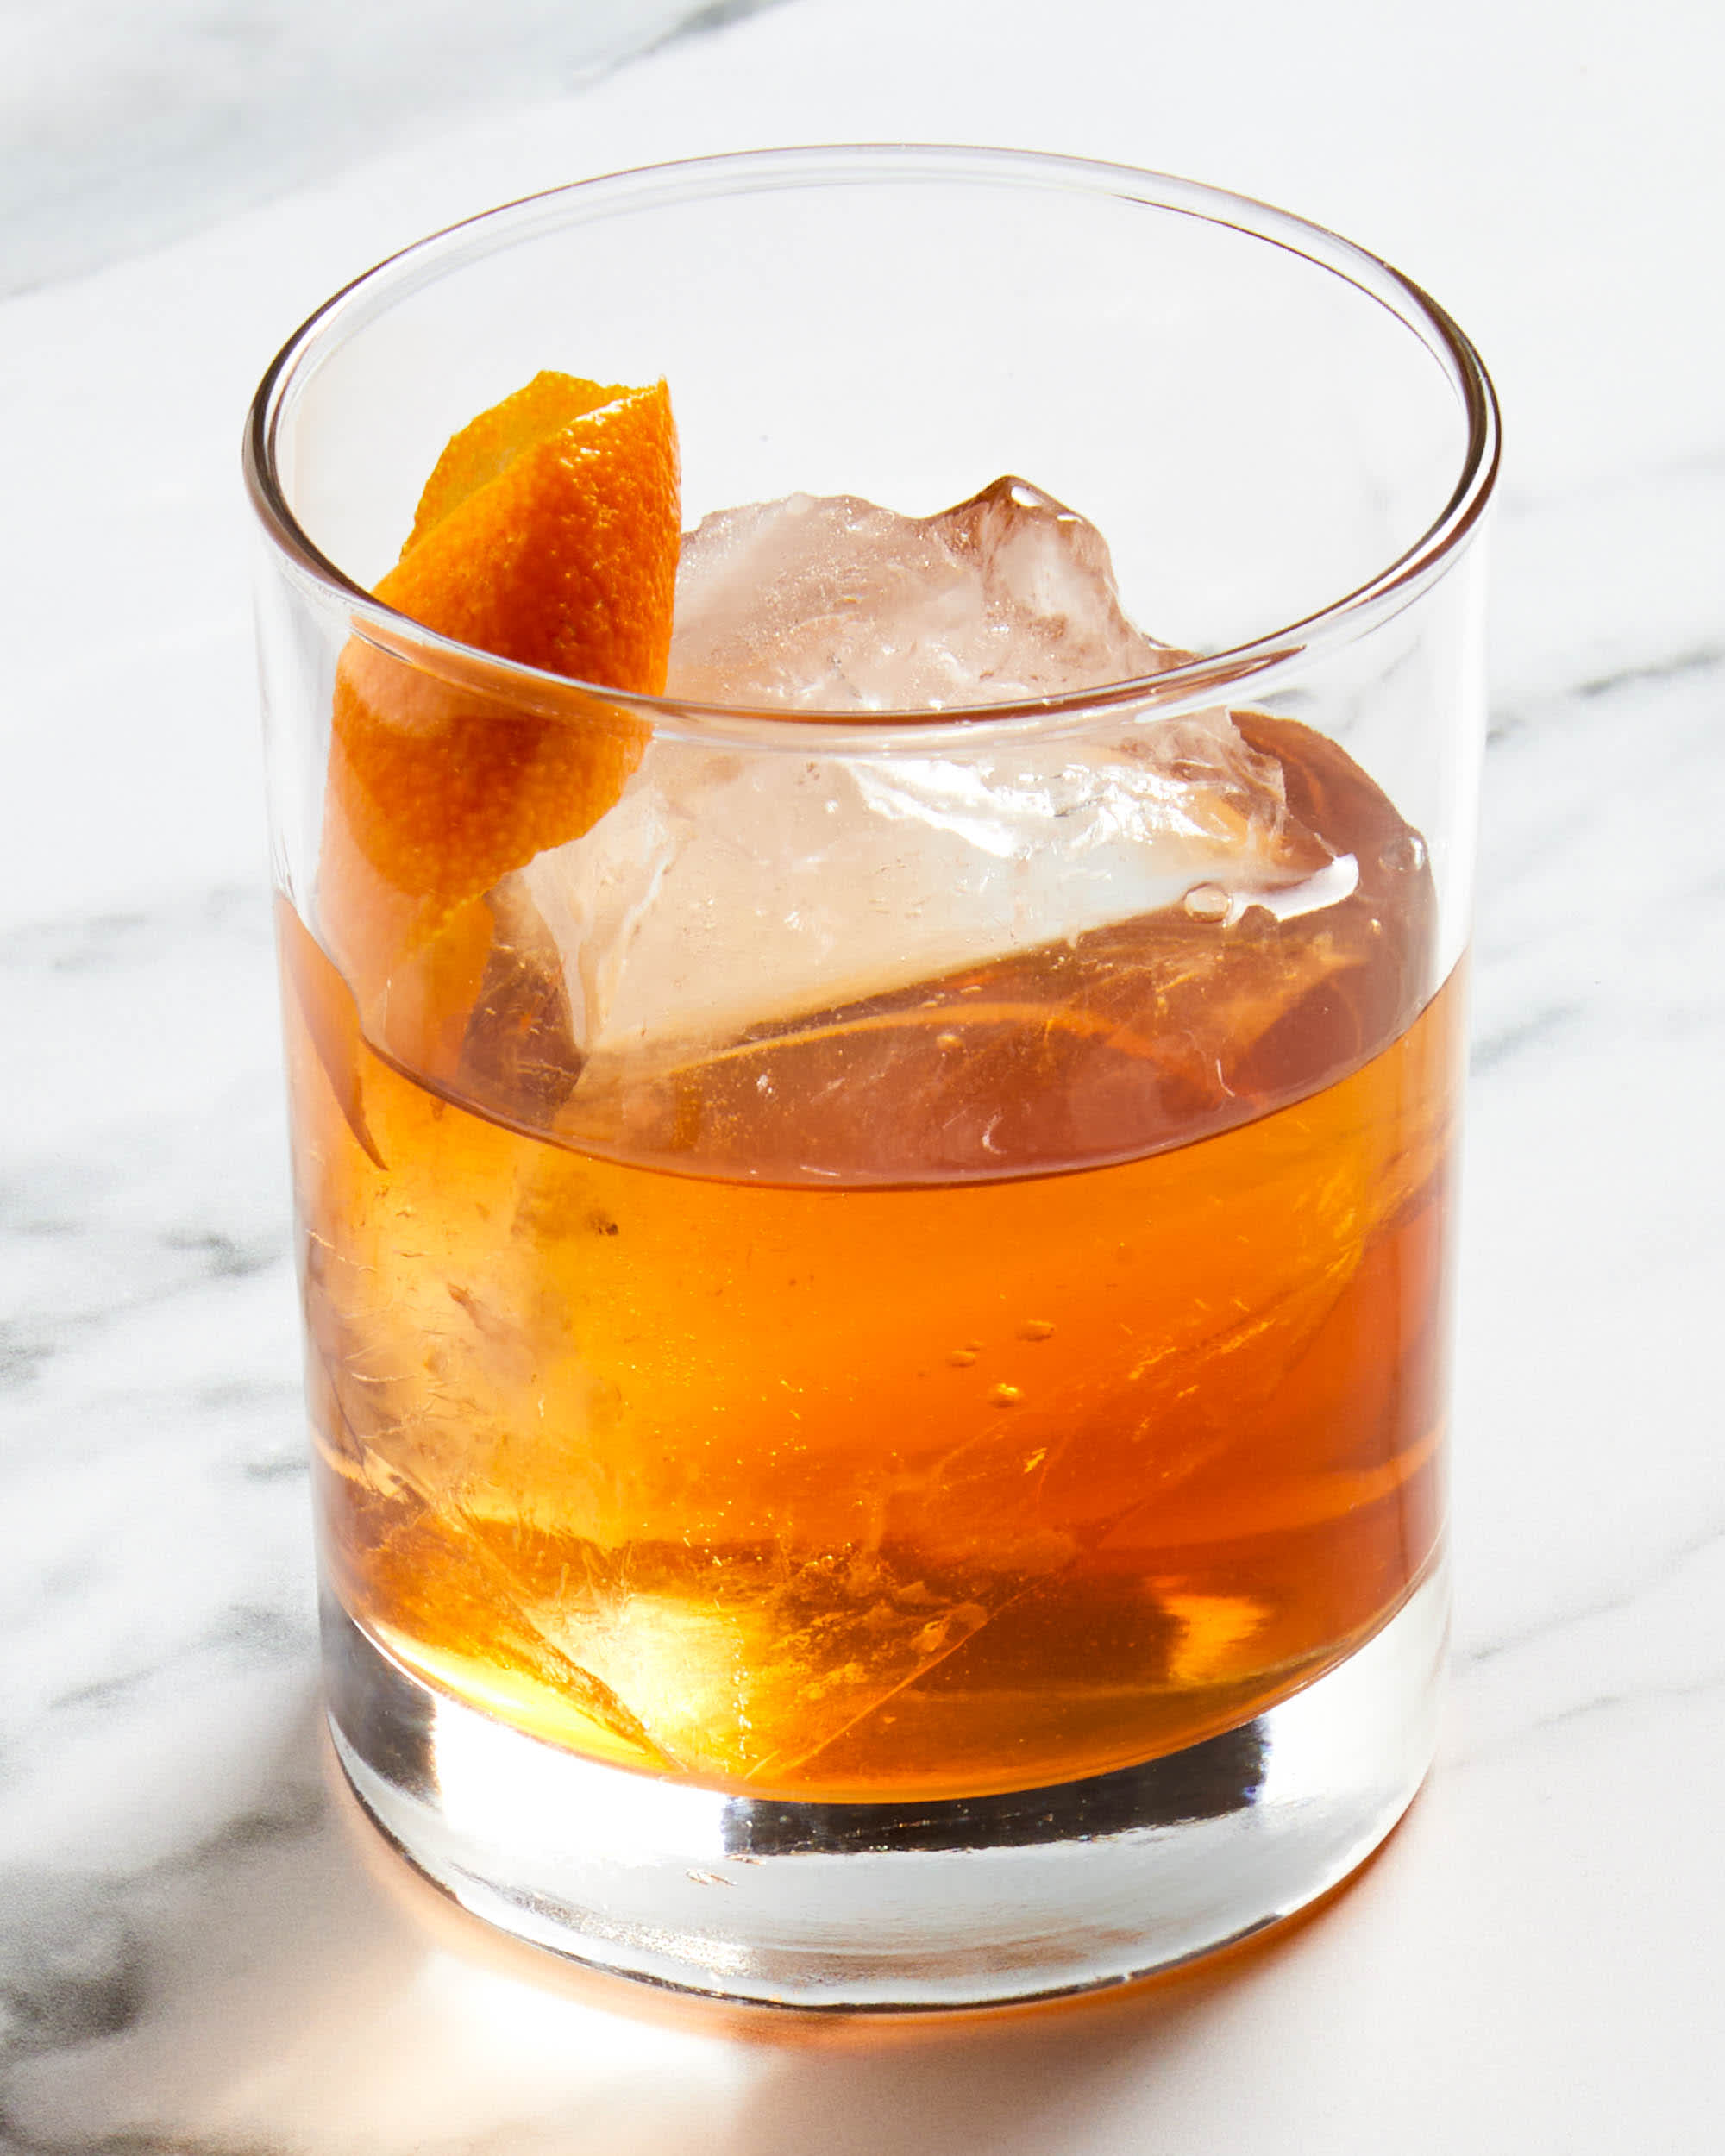 Classic Old Fashioned Cocktail Recipe (Step by Step)